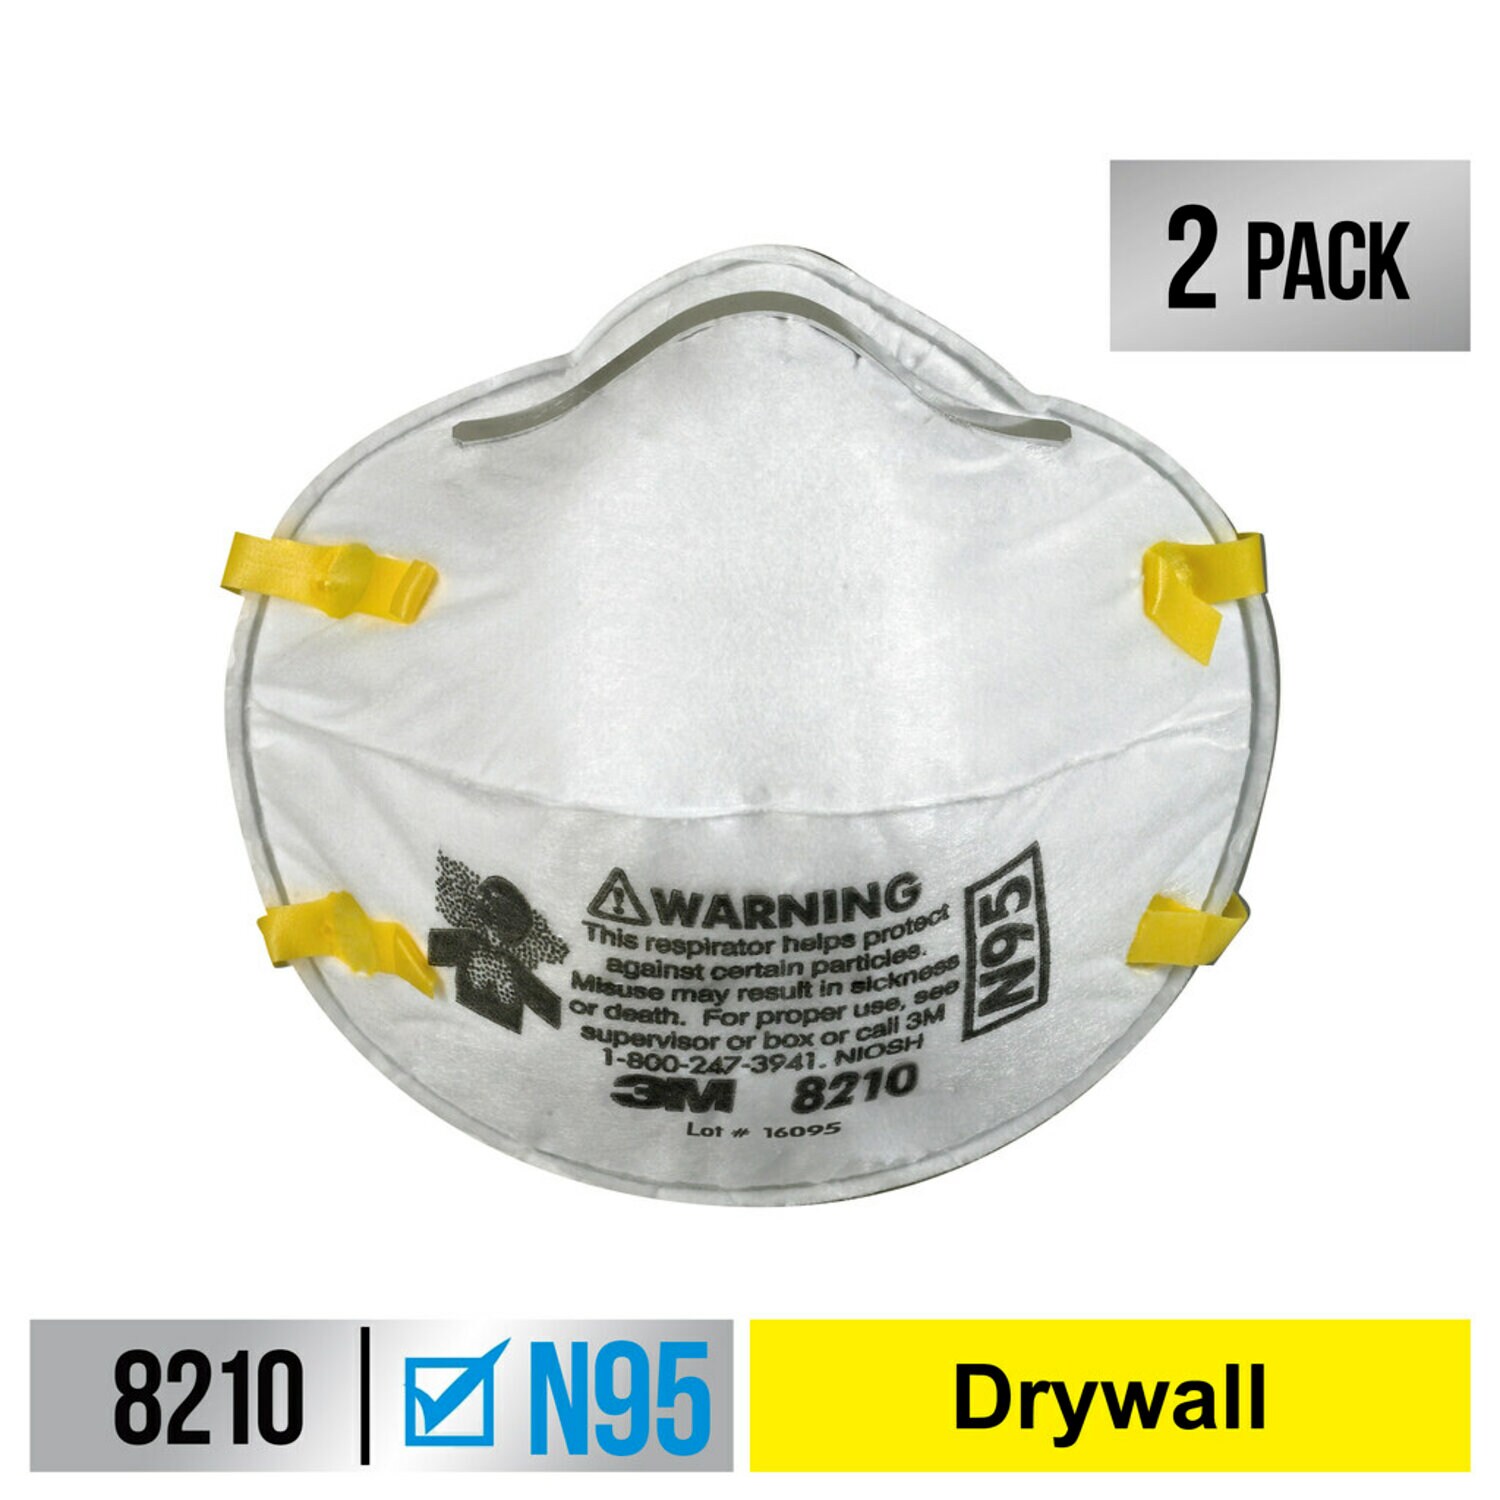 7100157620 - 3M Performance Drywall Sanding Respirator N95 Particulate, 8210D2-DC, 2
eaches/pack, 12 packs/case